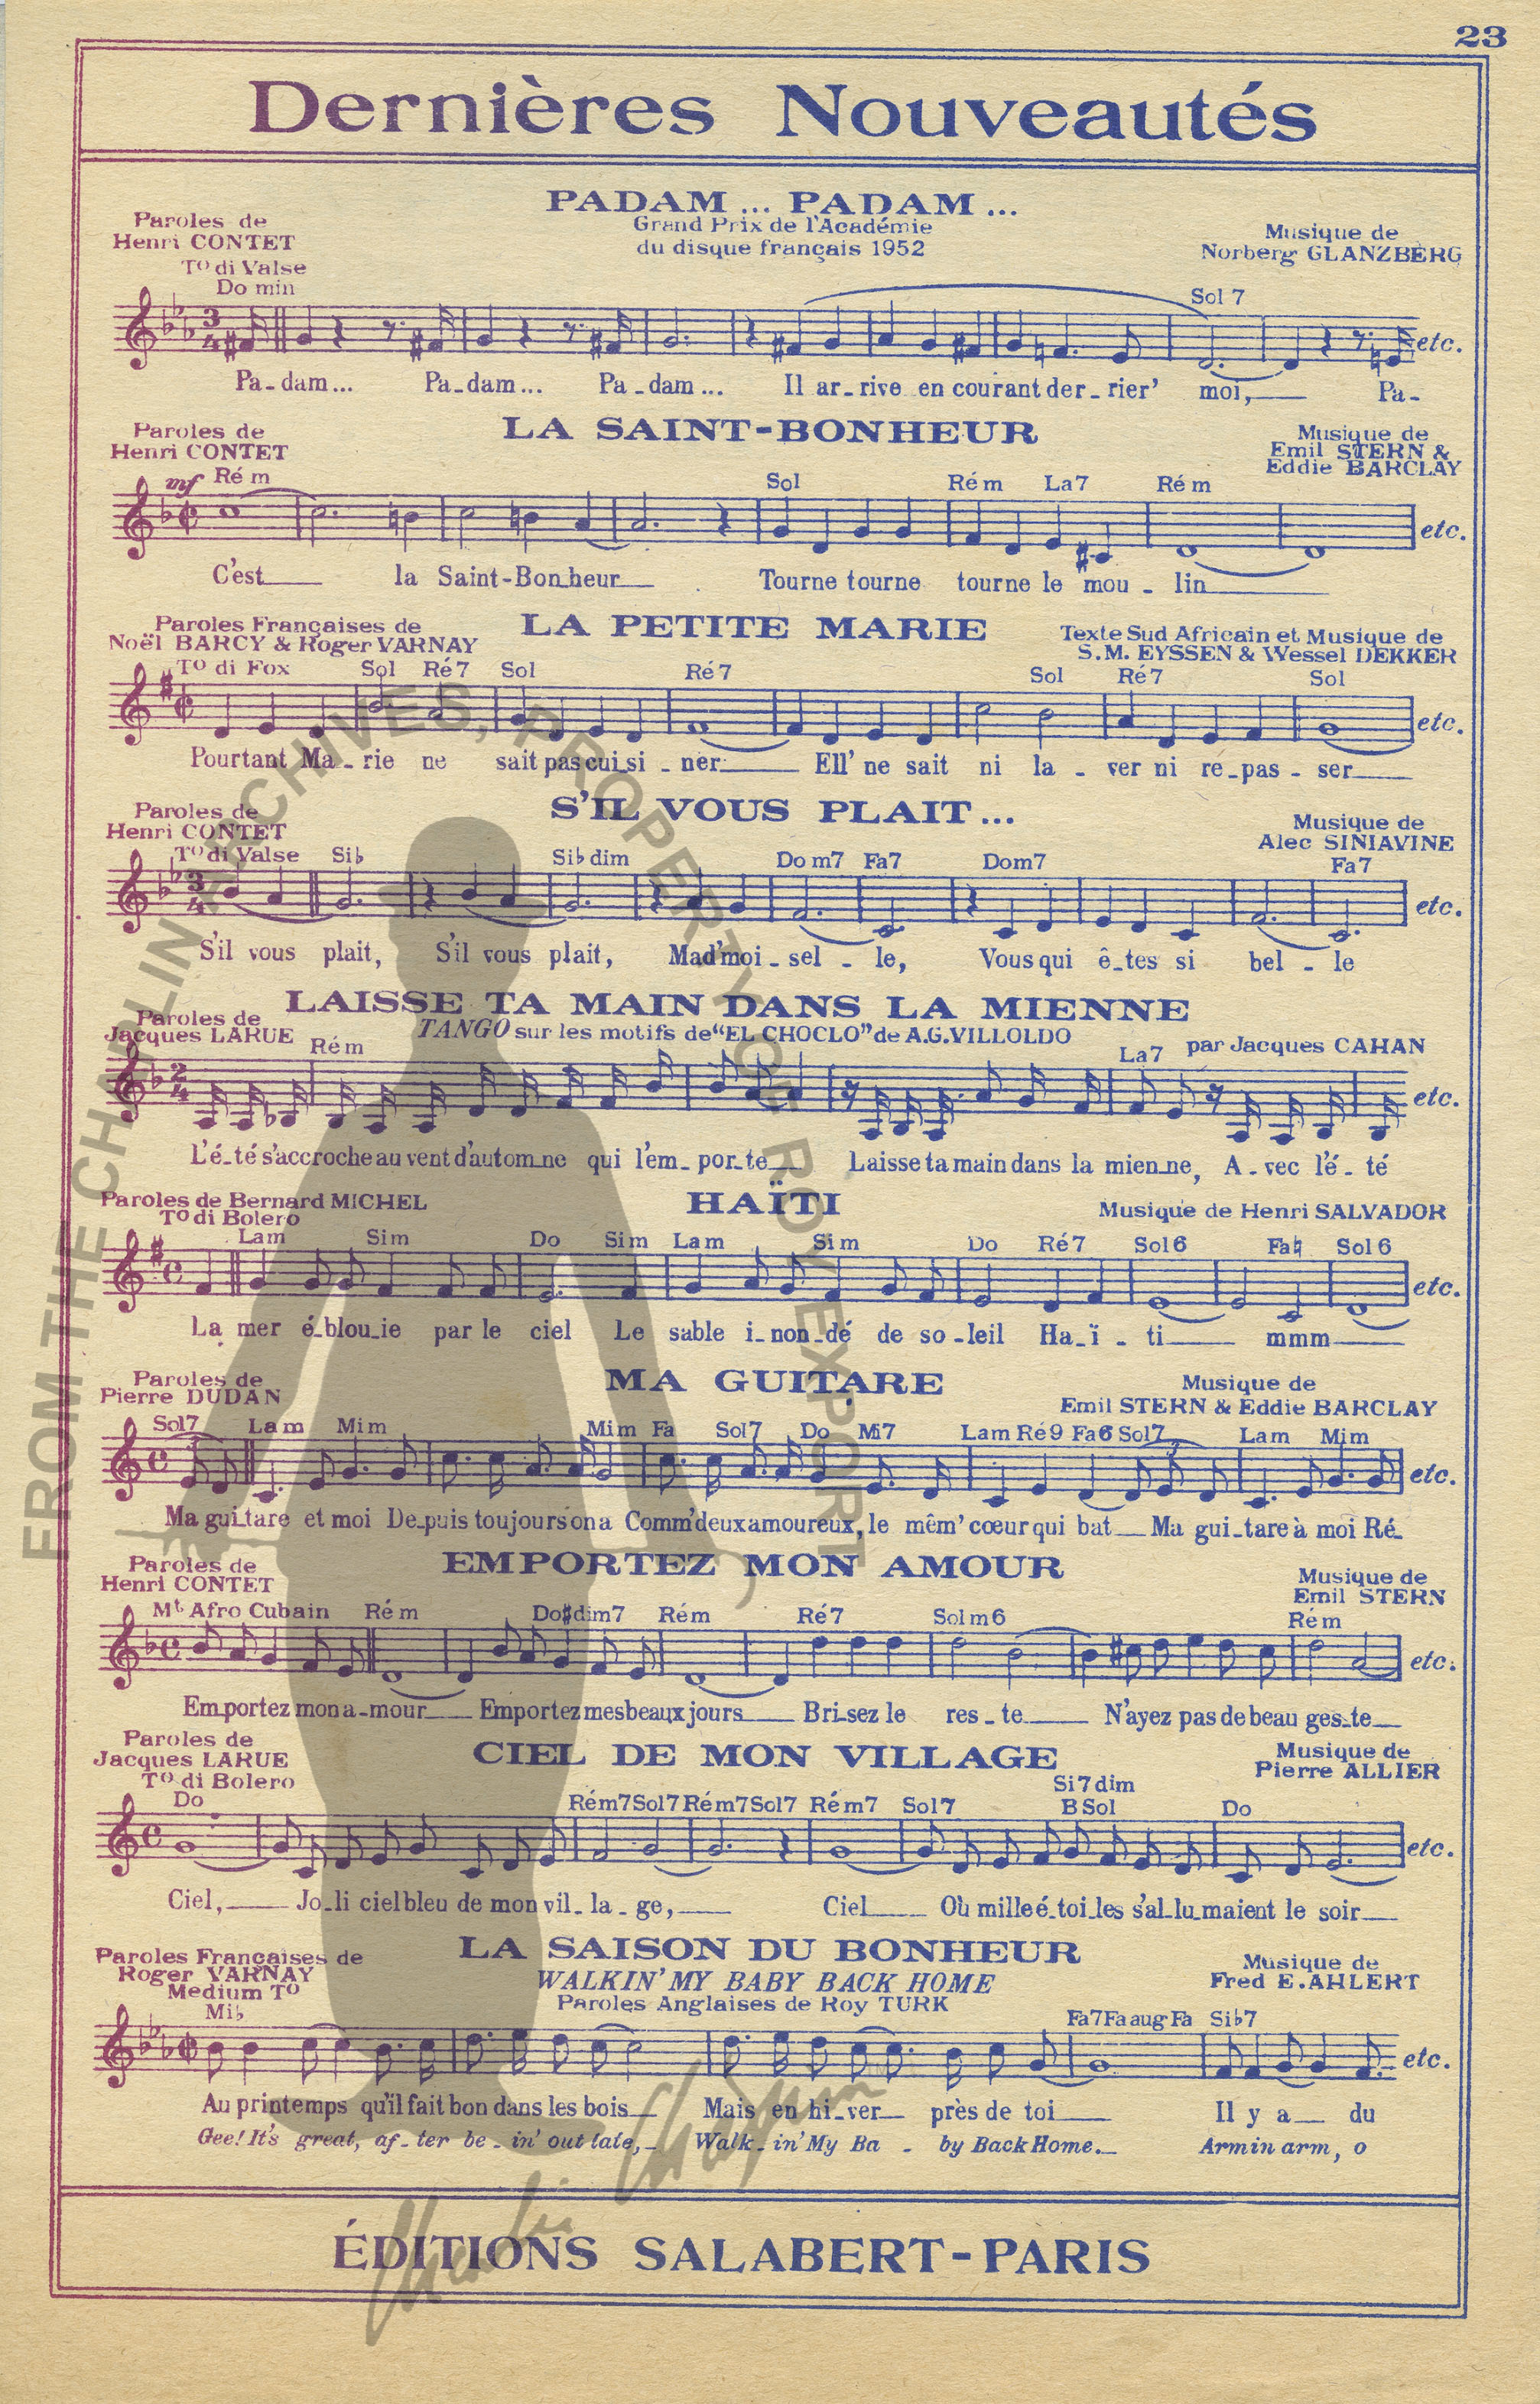 Topics, Topics, Oui! Tray Bong! : or my Pal Jones/written & composed by  Norton Atkins ; arranged by John S. Baker; Sung by Charles Chaplin